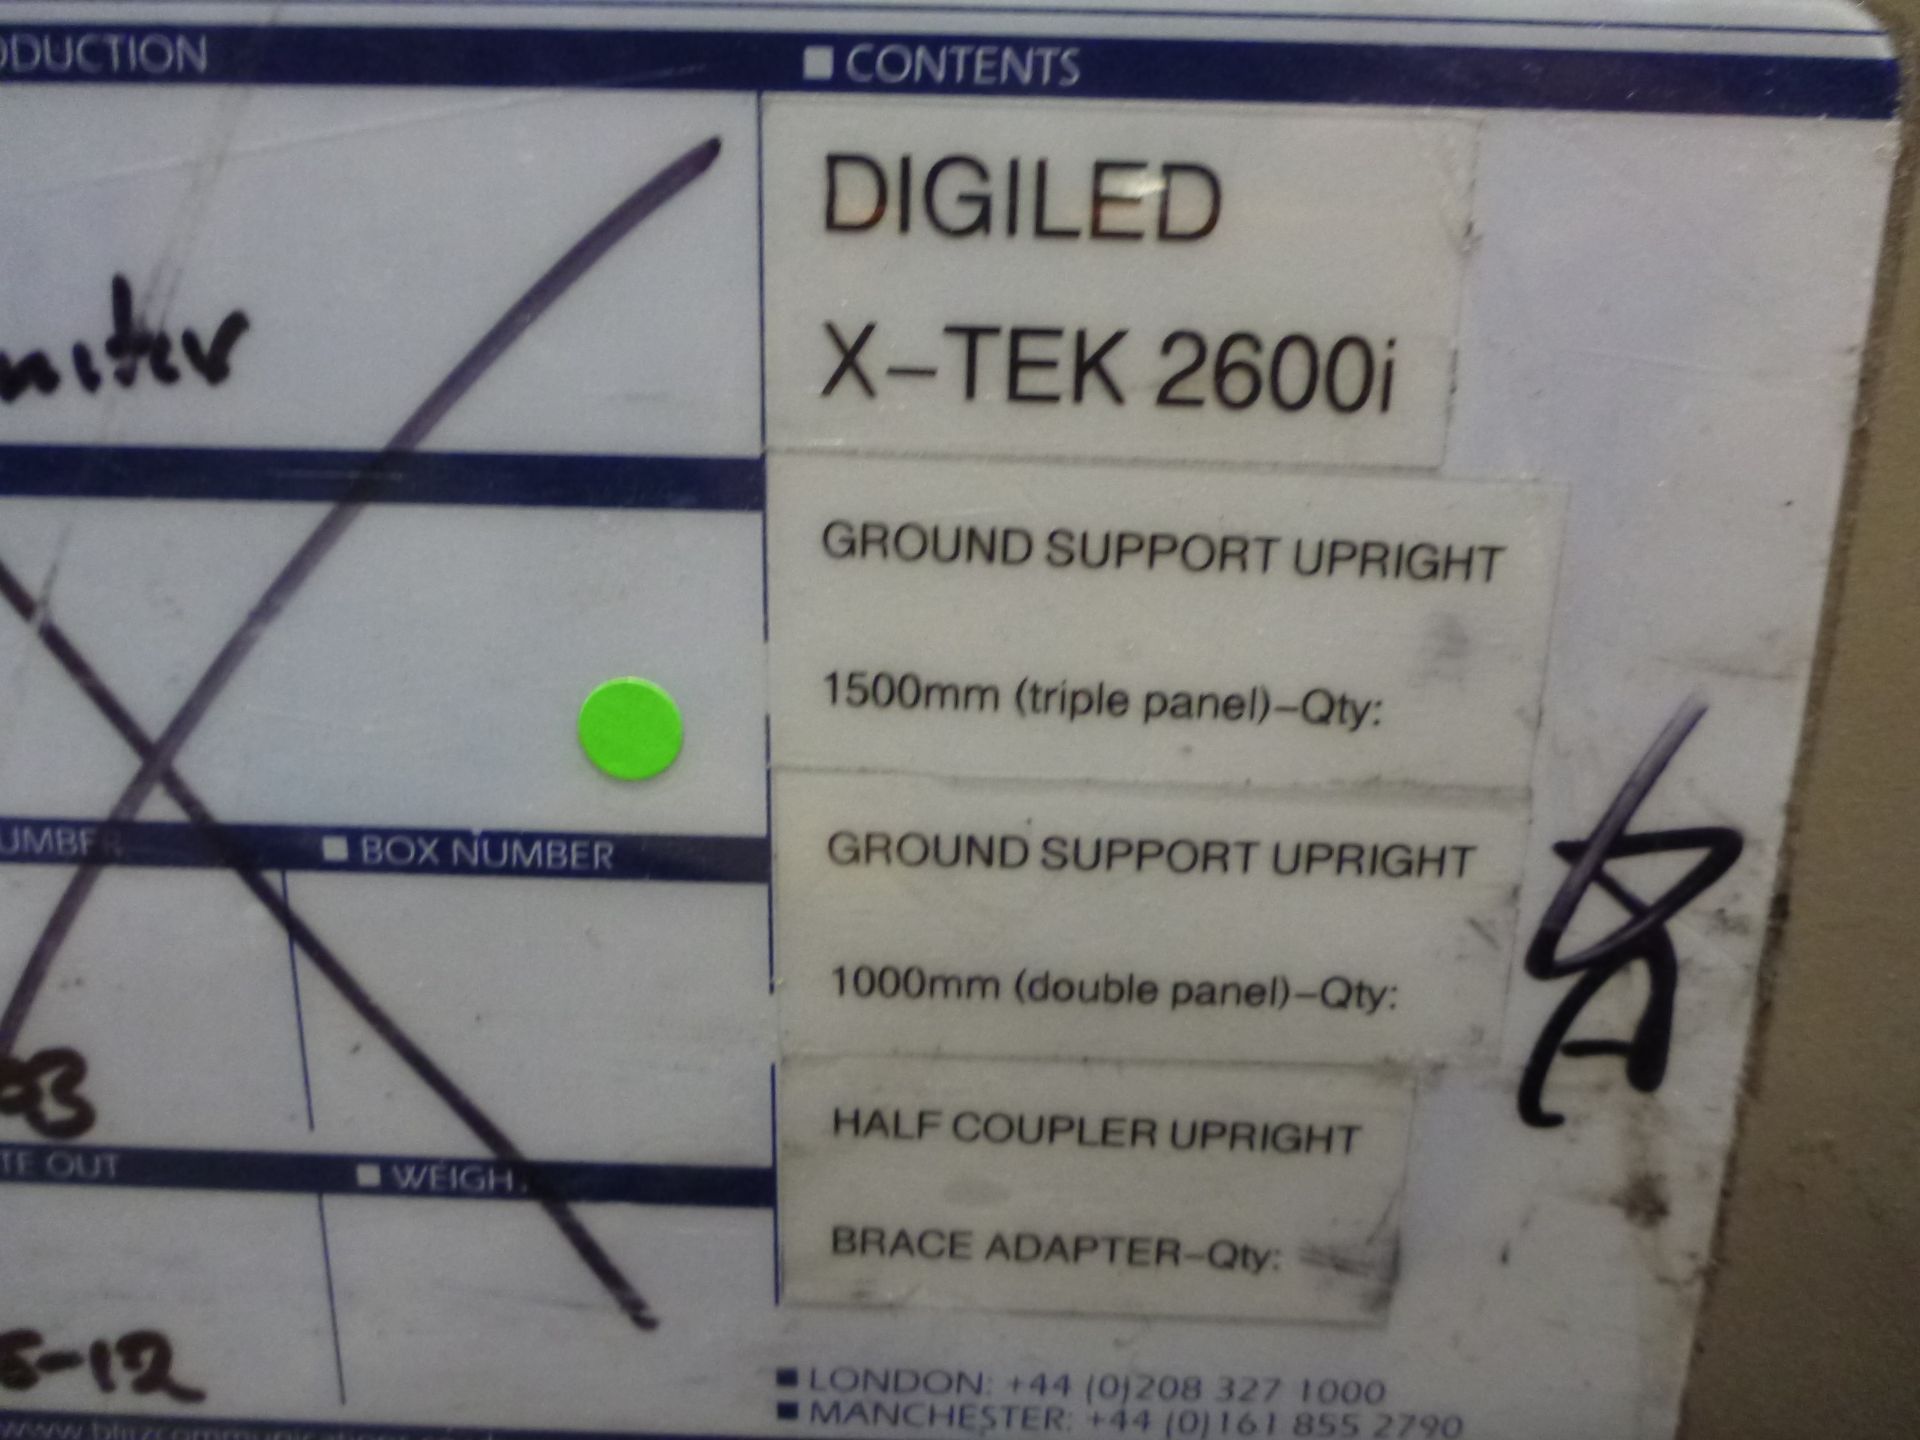 DigiLED X-Tek 2600i Ground Support Uprights 1500 mm triple panel, Qty 8, 1000 mm double panels Qty 2 - Image 3 of 4